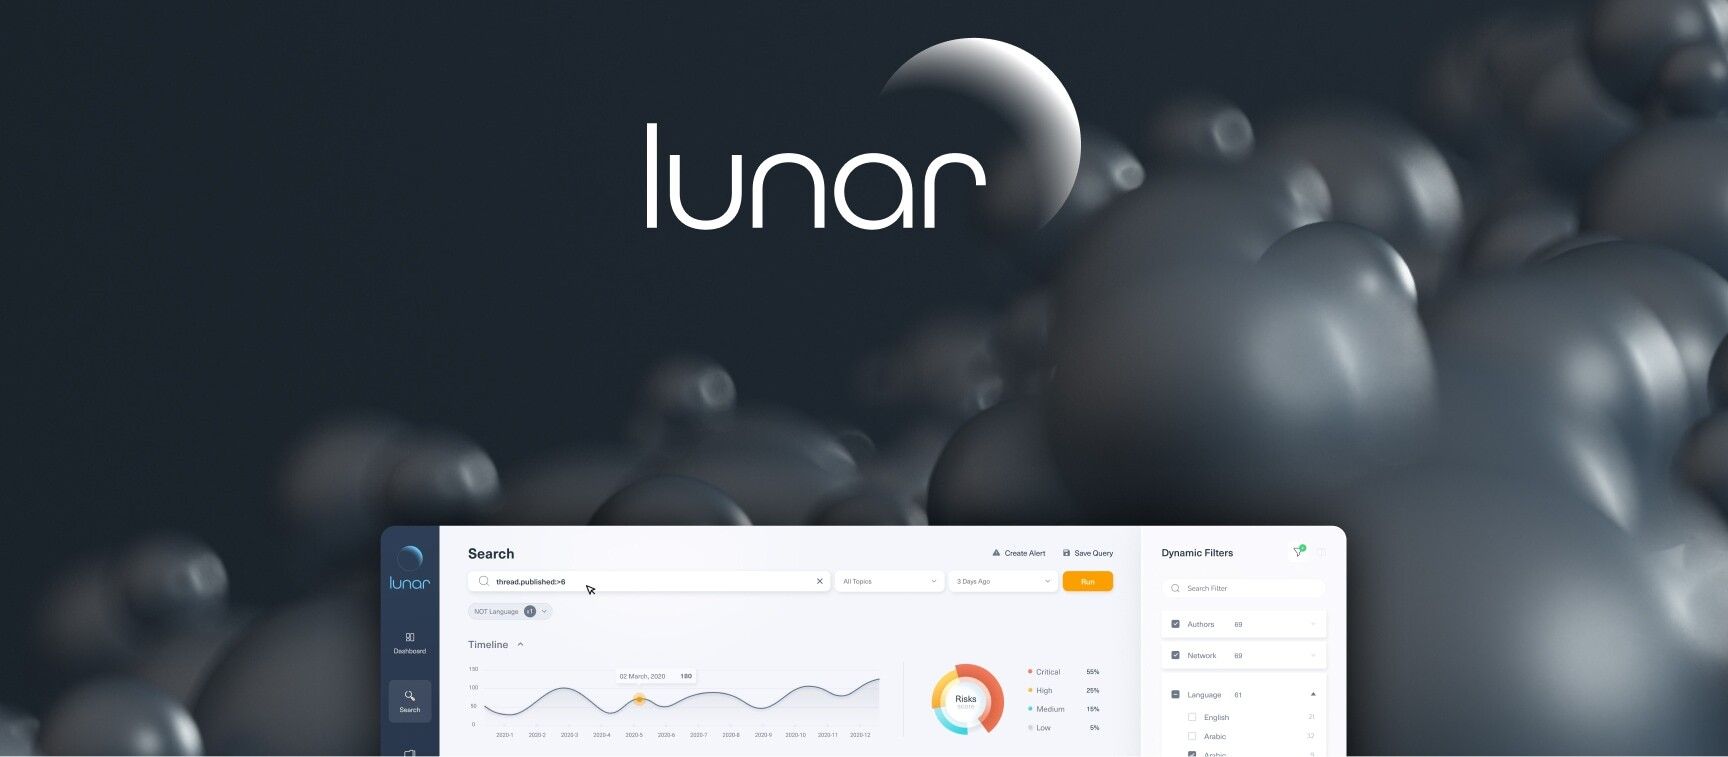 Lunar - Monitoring the Dark Web for Ransomware and Supply Chain Risks